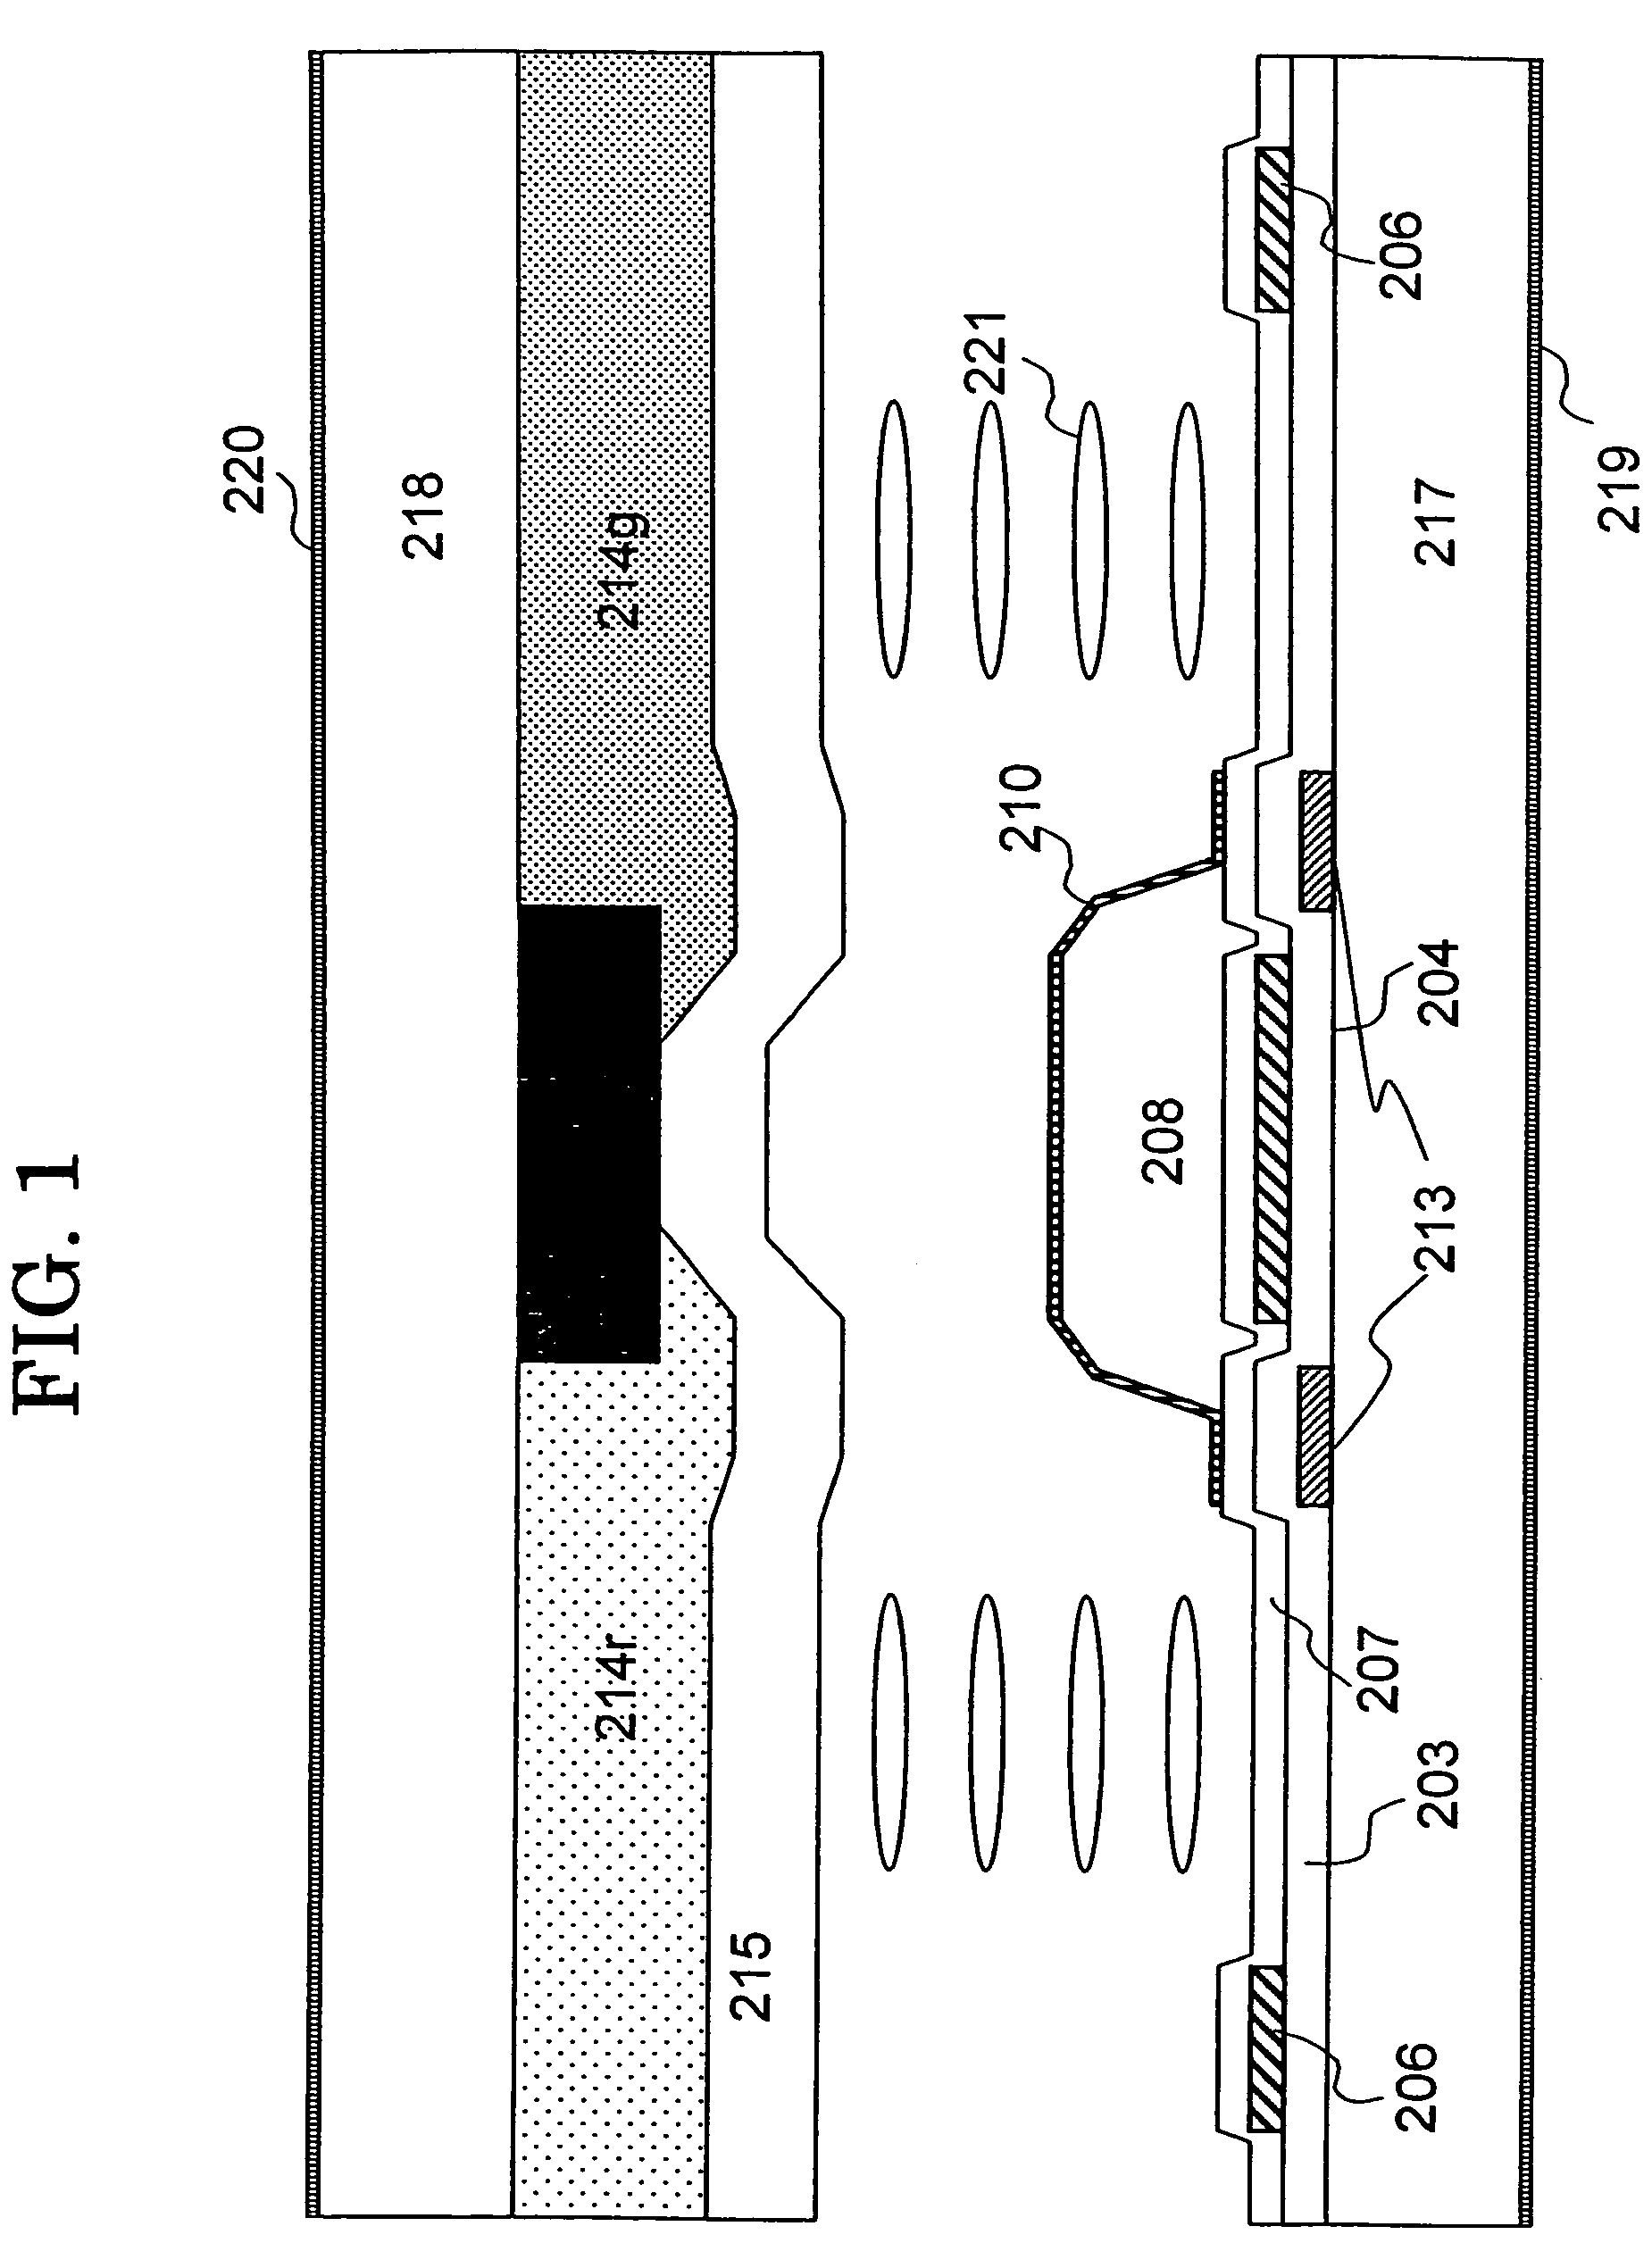 Liquid crystal display device with mound-like insulating film formed on video line covered by a common electrode with edges of the mound positioned on light shield electrode